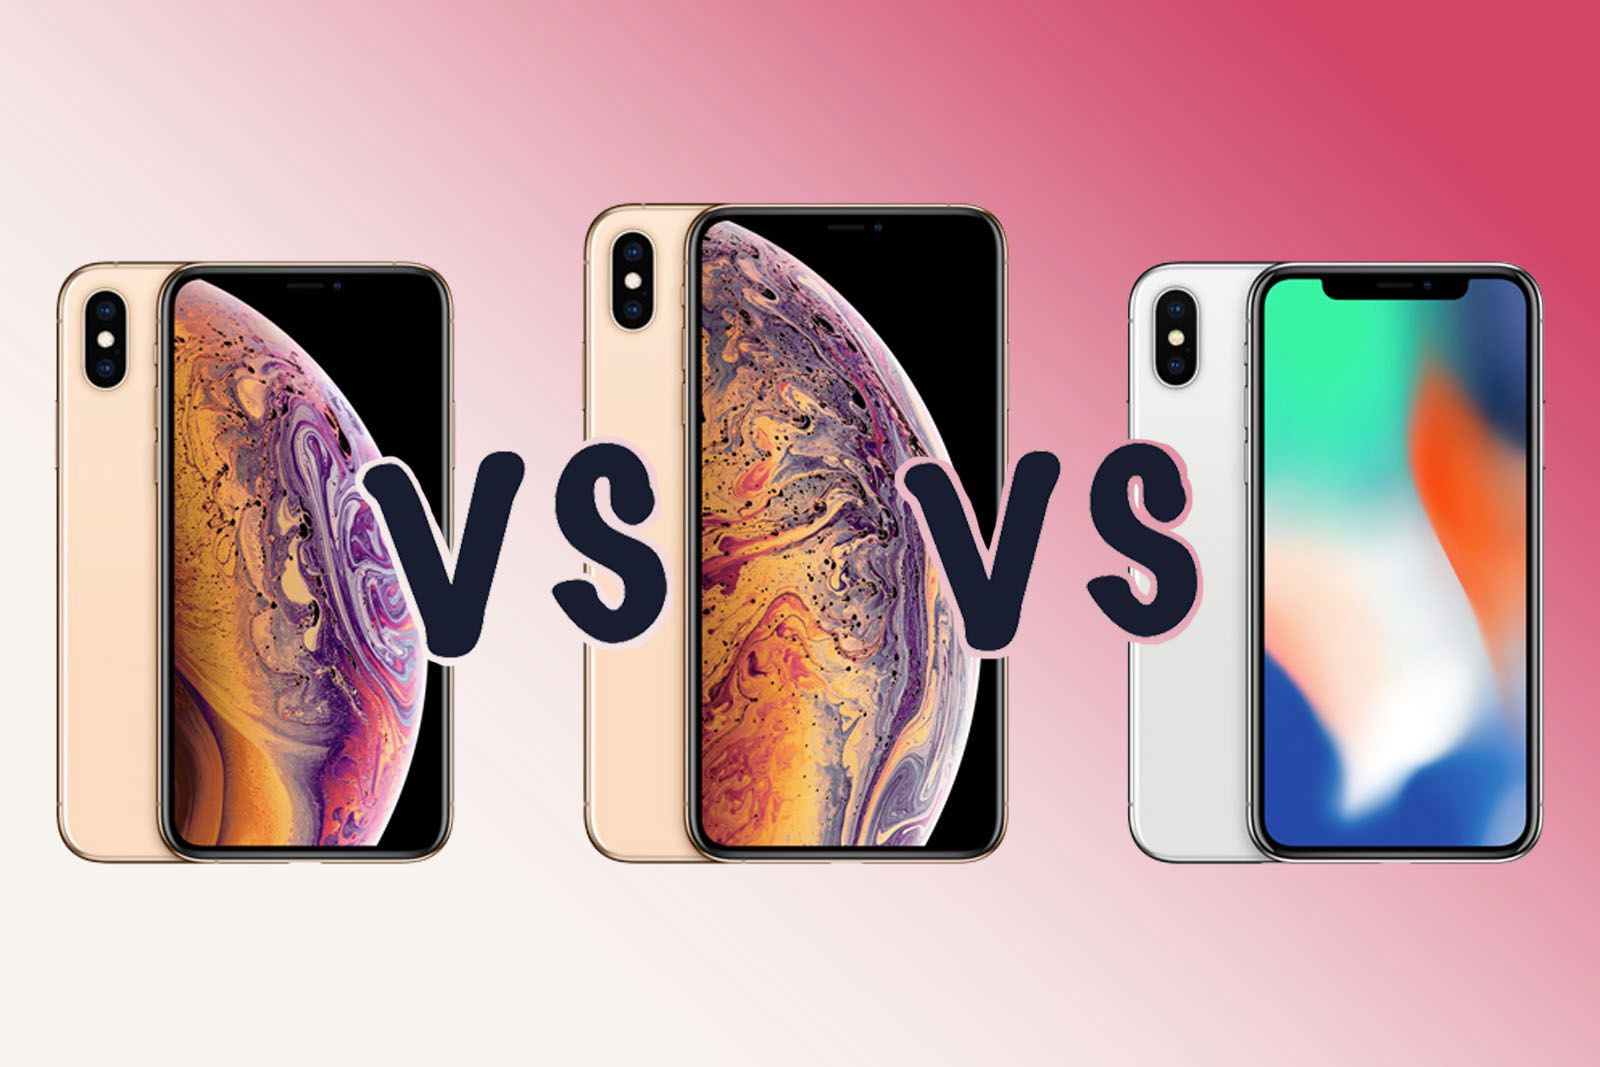 Apple Iphone Xi Vs Iphone X Whats The Rumoured Difference image 1